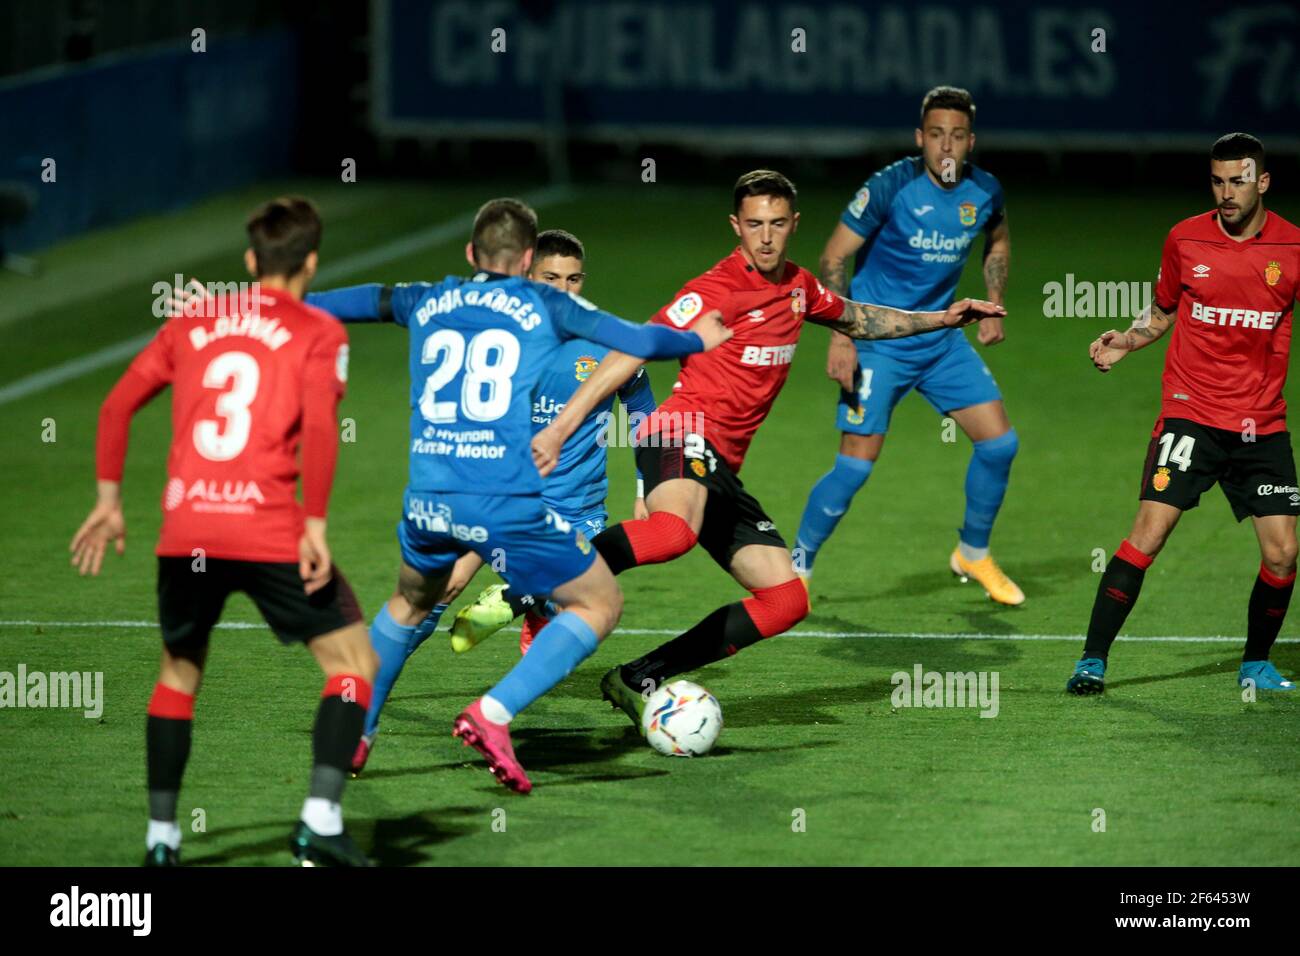 Fuenlabrada, Madrid, Spain, 29.03.2021C. F. Fuenlabrada against R. C. D. Mallorca match of the second division of Spanish soccer in match 31. Final score 4-1 winner Fuenlabrada with goals from the players Oscar Pichi 13 y 38  Nteka 41  and Pathe Ciss 73  Mallorca scores his player Mboula 56  Photo: Juan Carlos Rojas/Picture Alliance | usage worldwide Stock Photo